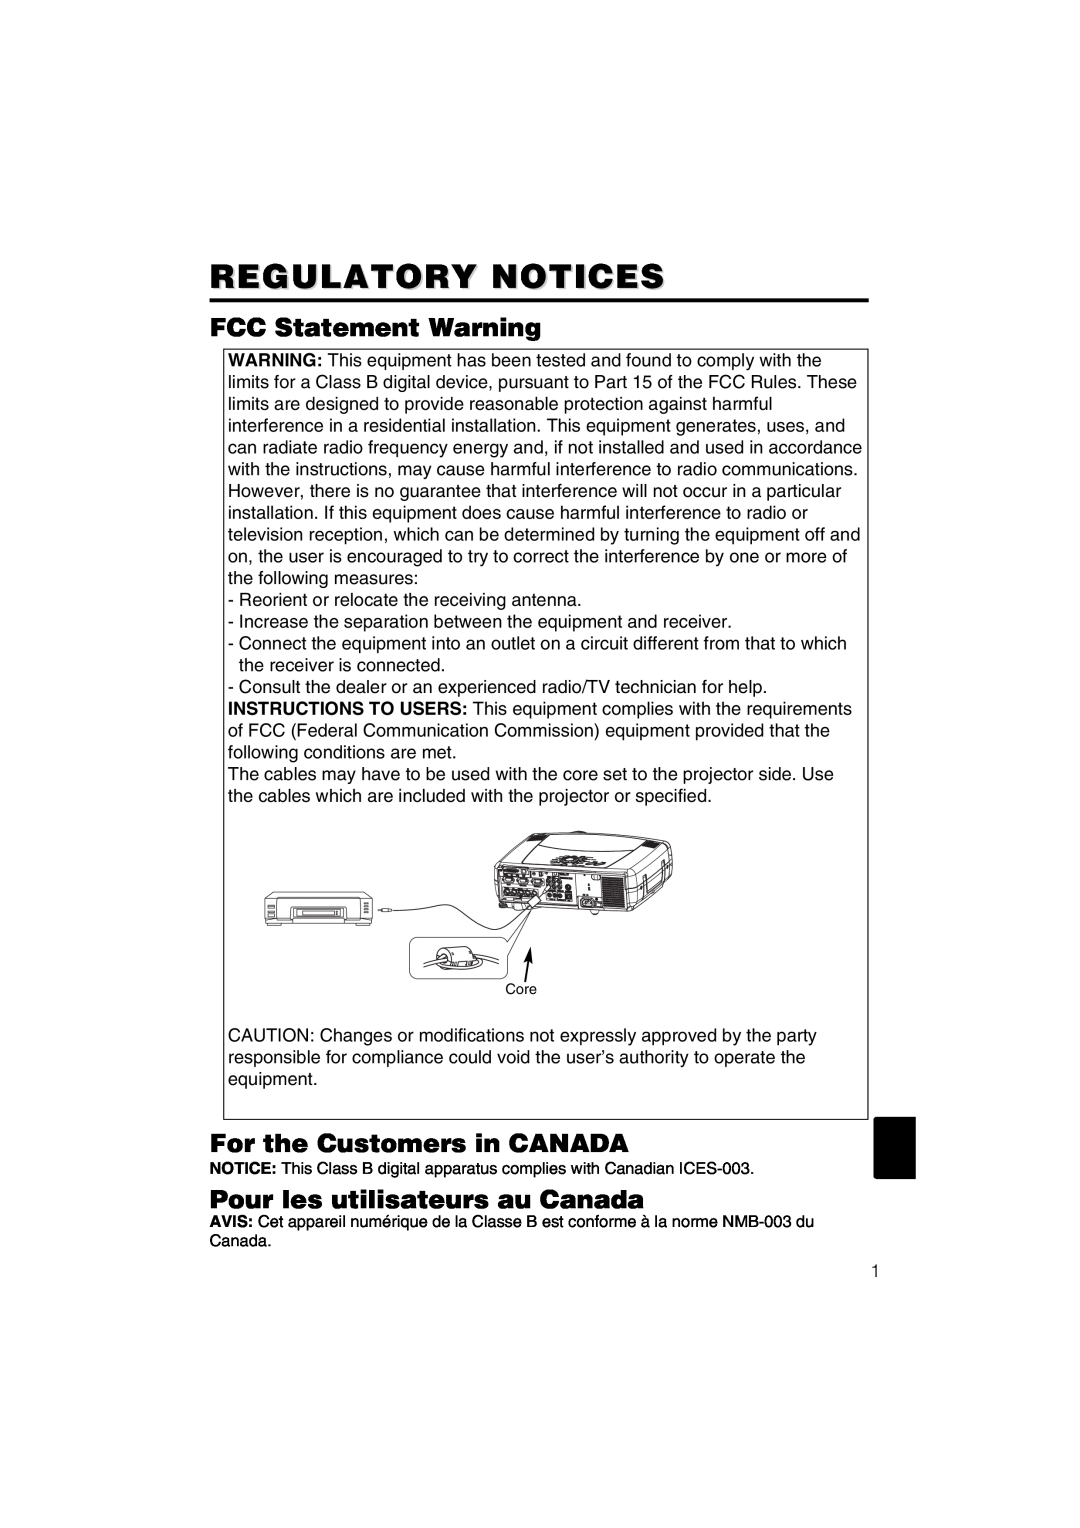 Hitachi CP-X885W Regulatory Notices, FCC Statement Warning, For the Customers in CANADA, Pour les utilisateurs au Canada 